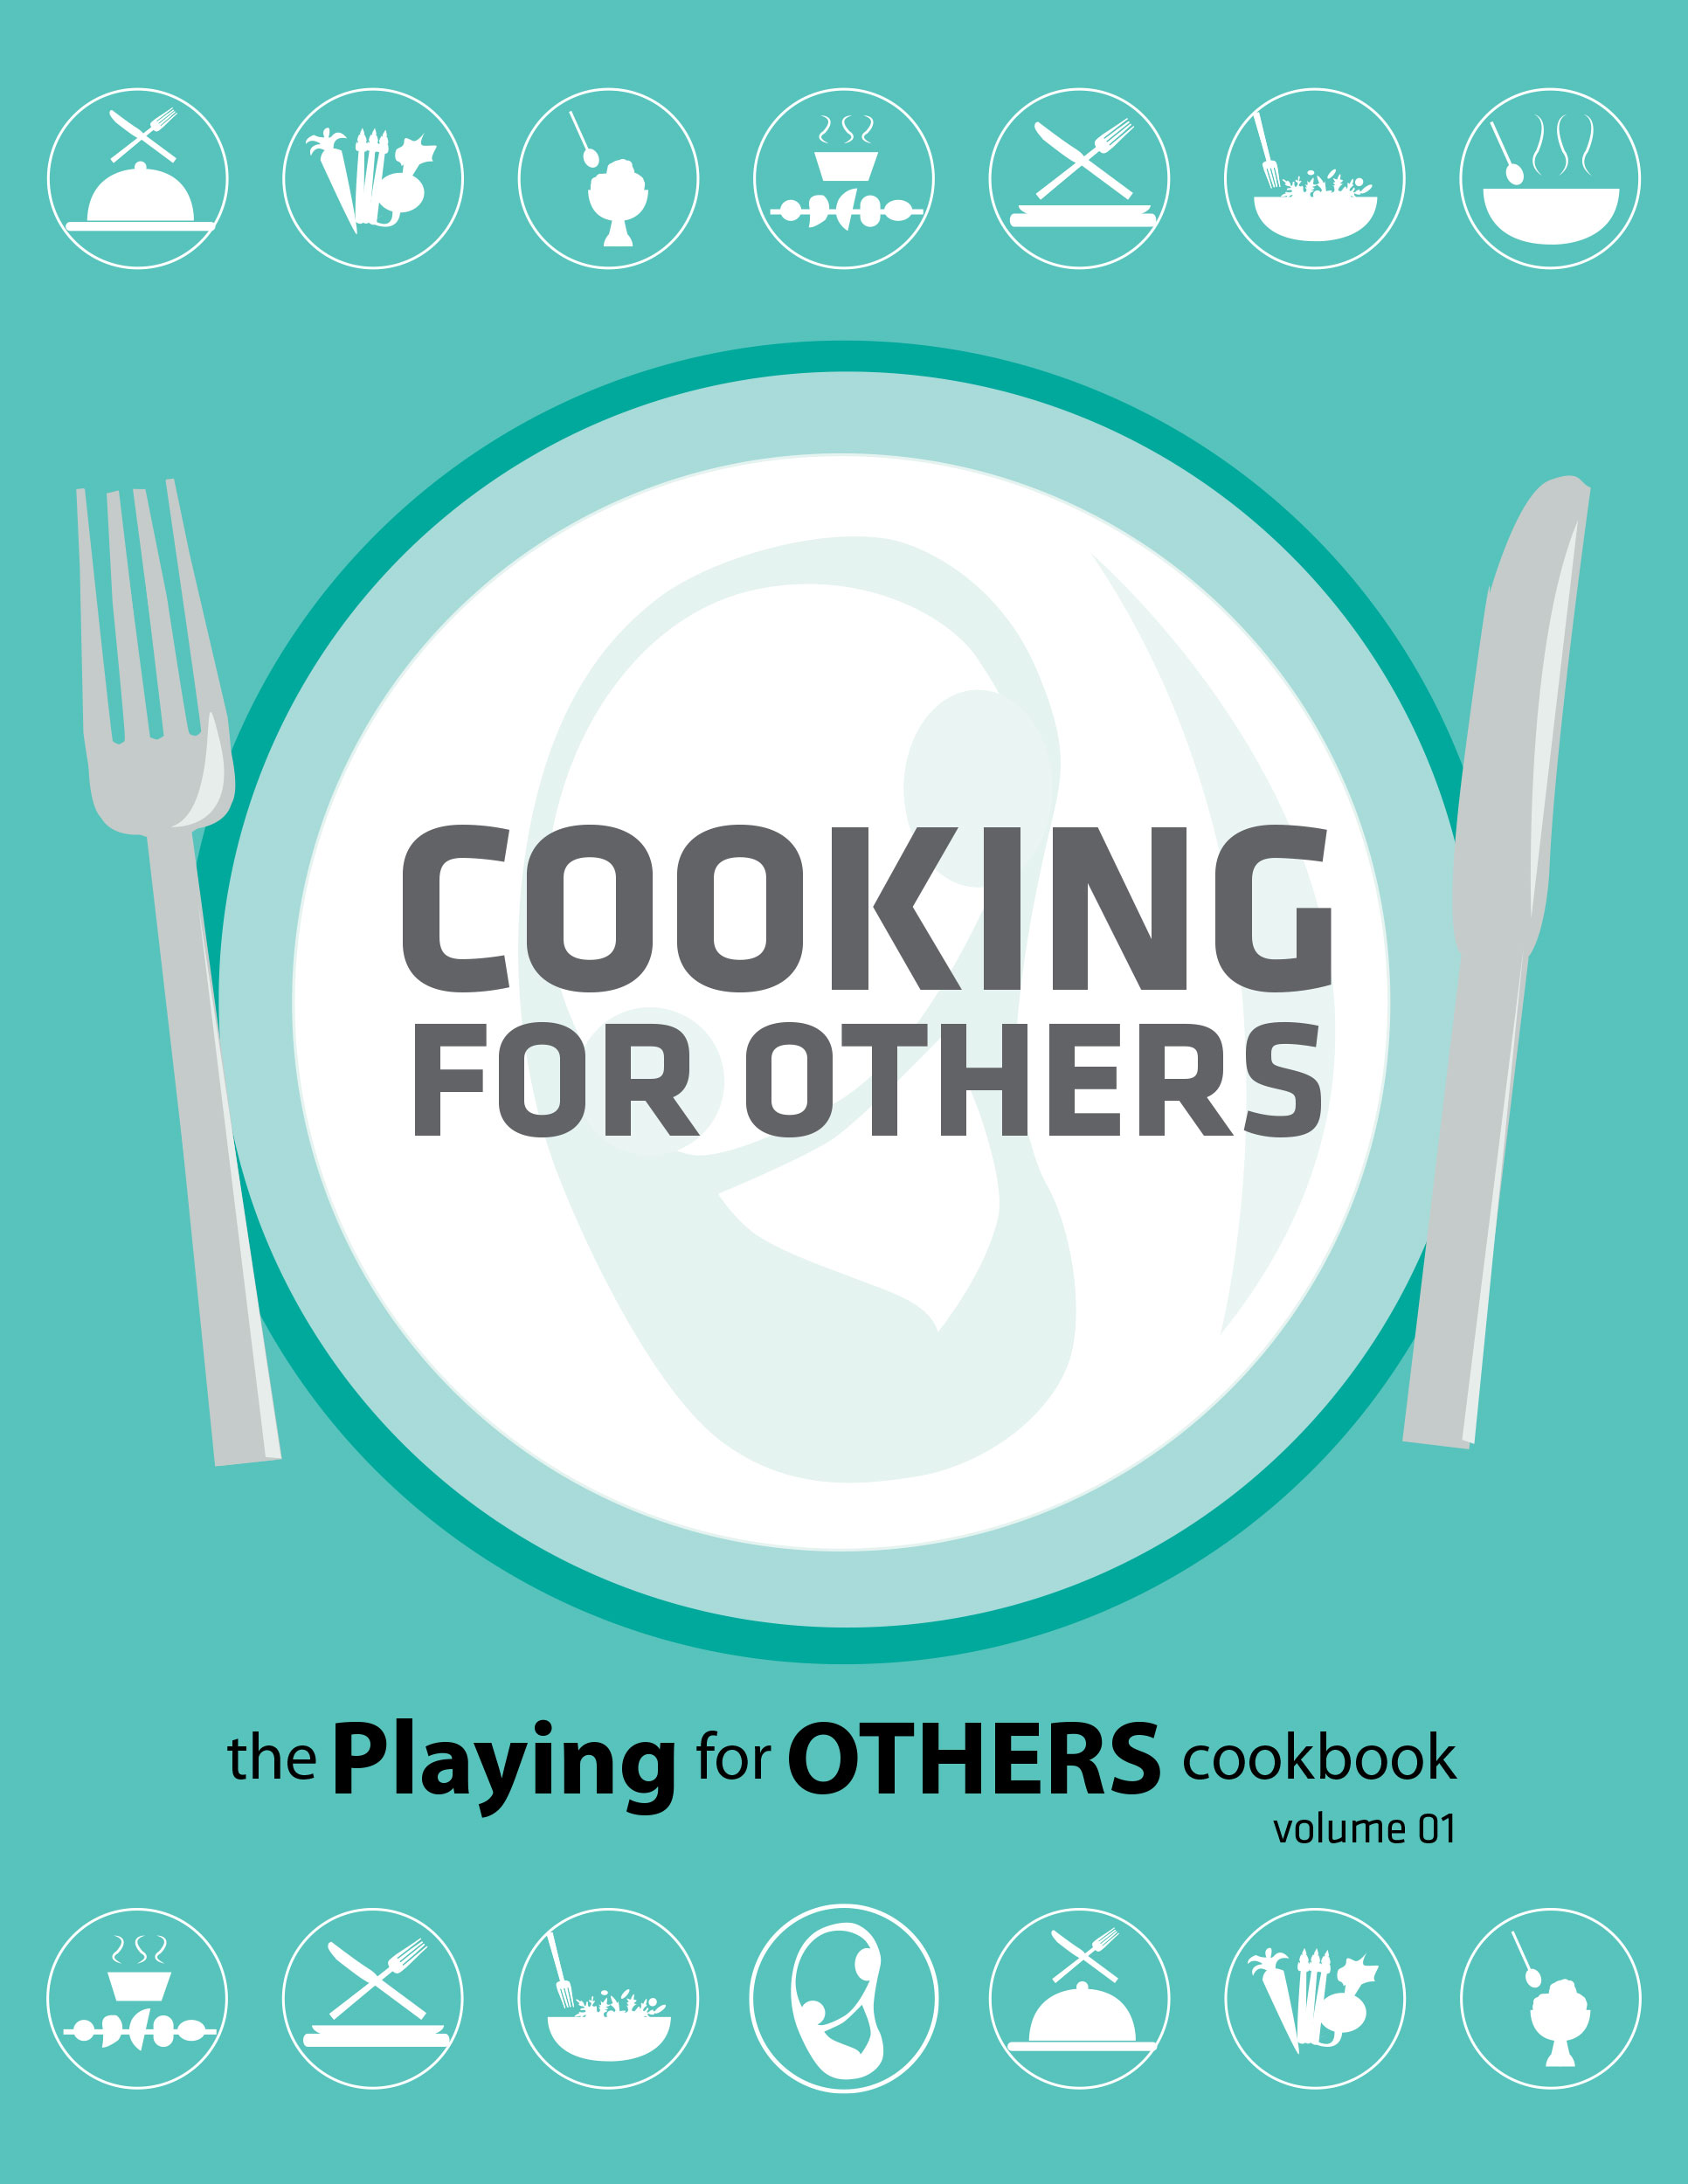 Playing for Other, Cooking for Other, Cook book design, Book cover design